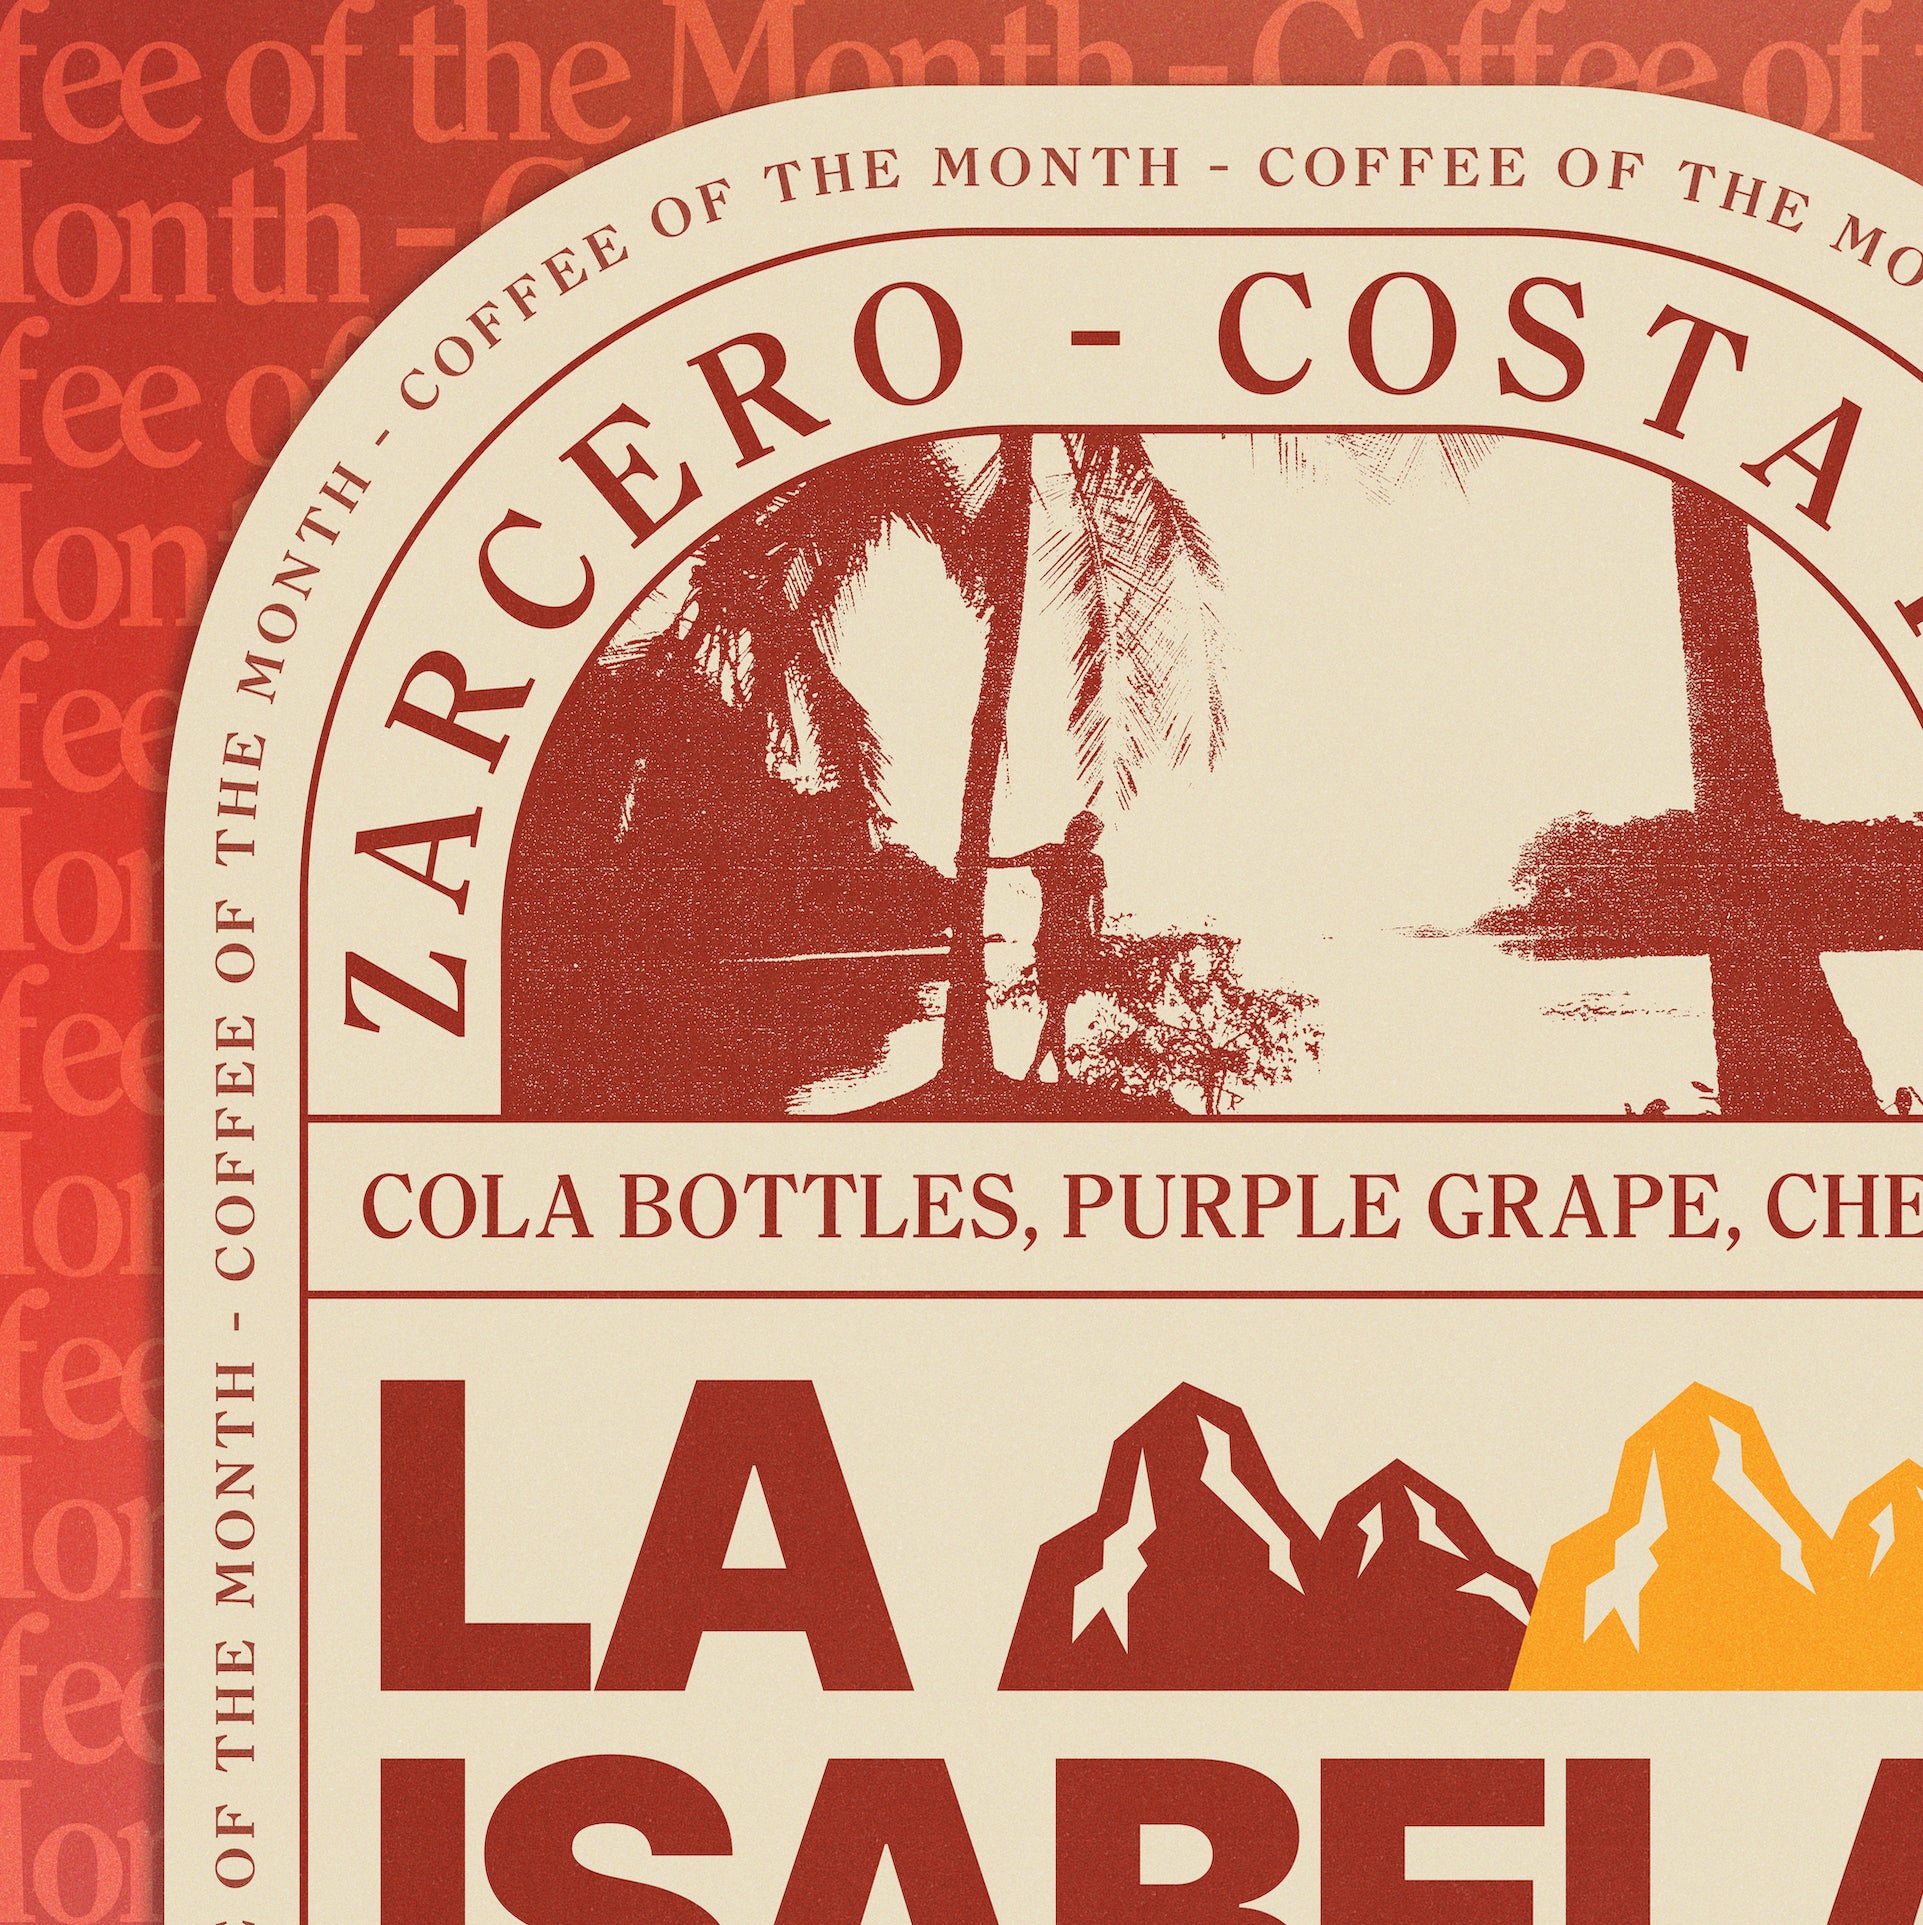 Coffee of the Month Poster - La Isabela (September)